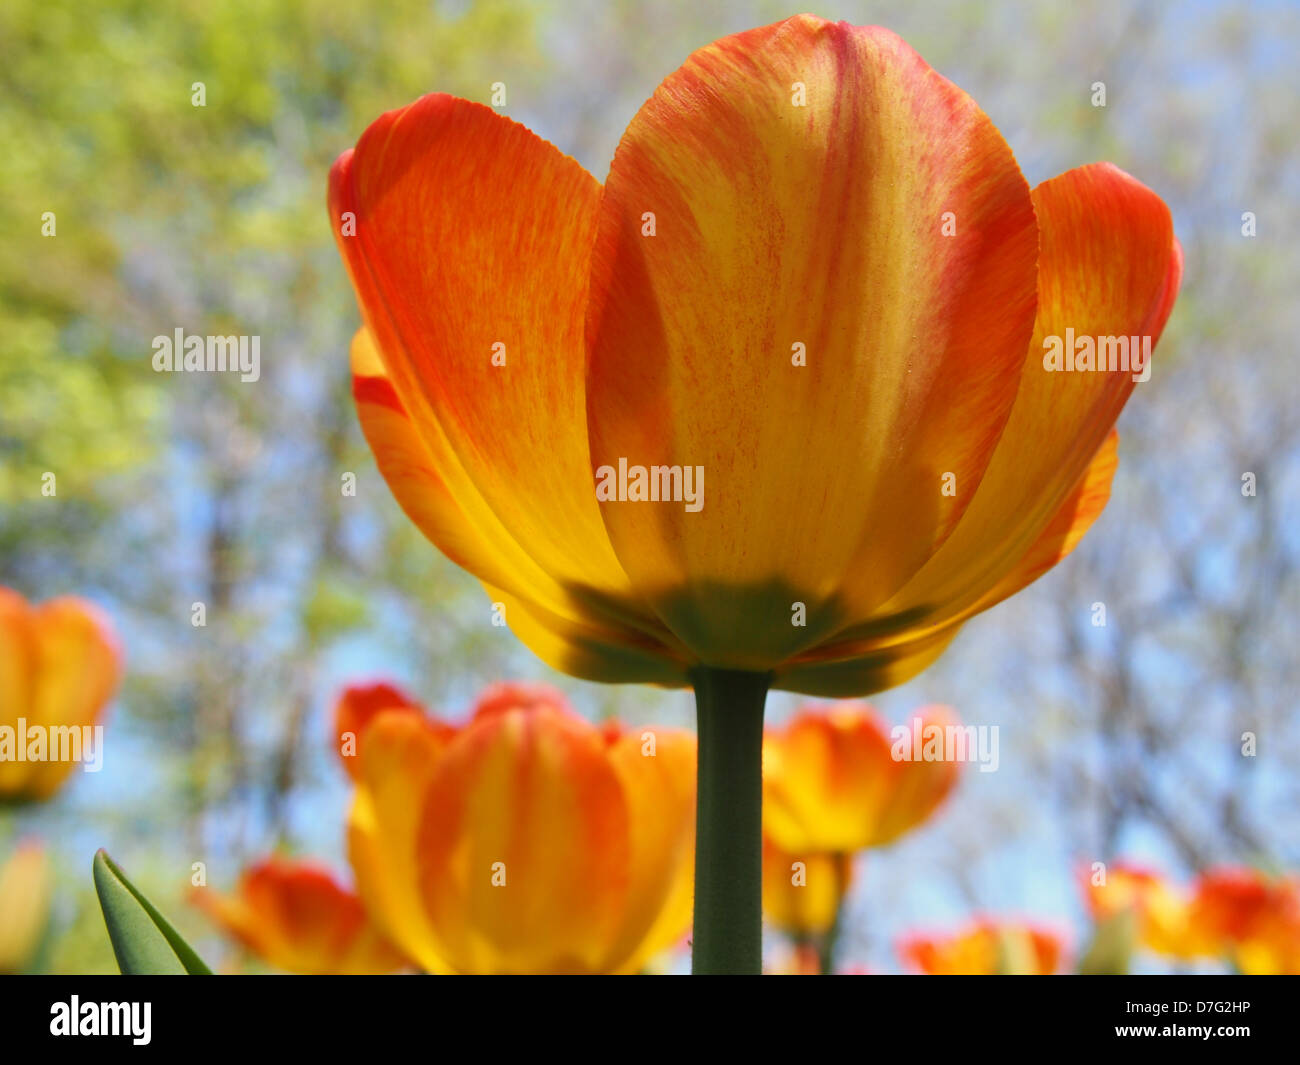 Big tulip in foreground, other tulips in background Stock Photo